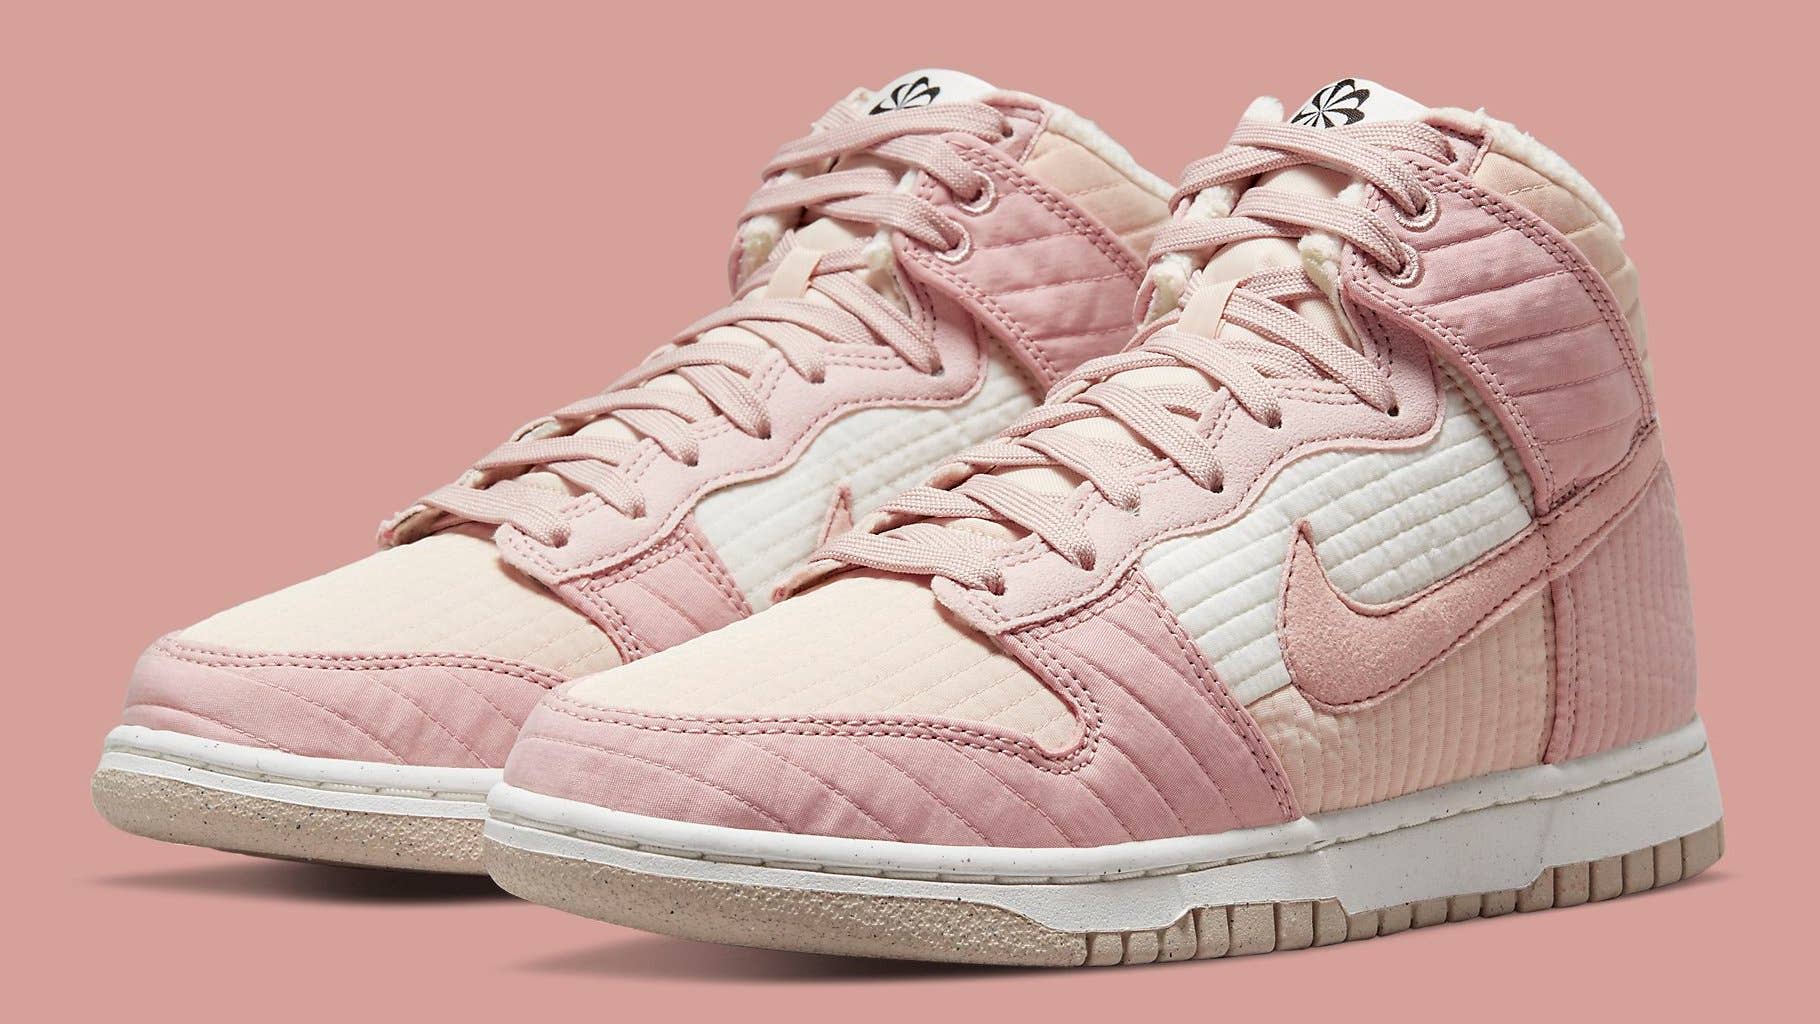 Nike Dunk High Toasty Pink DN9909-200 Release Date Pair